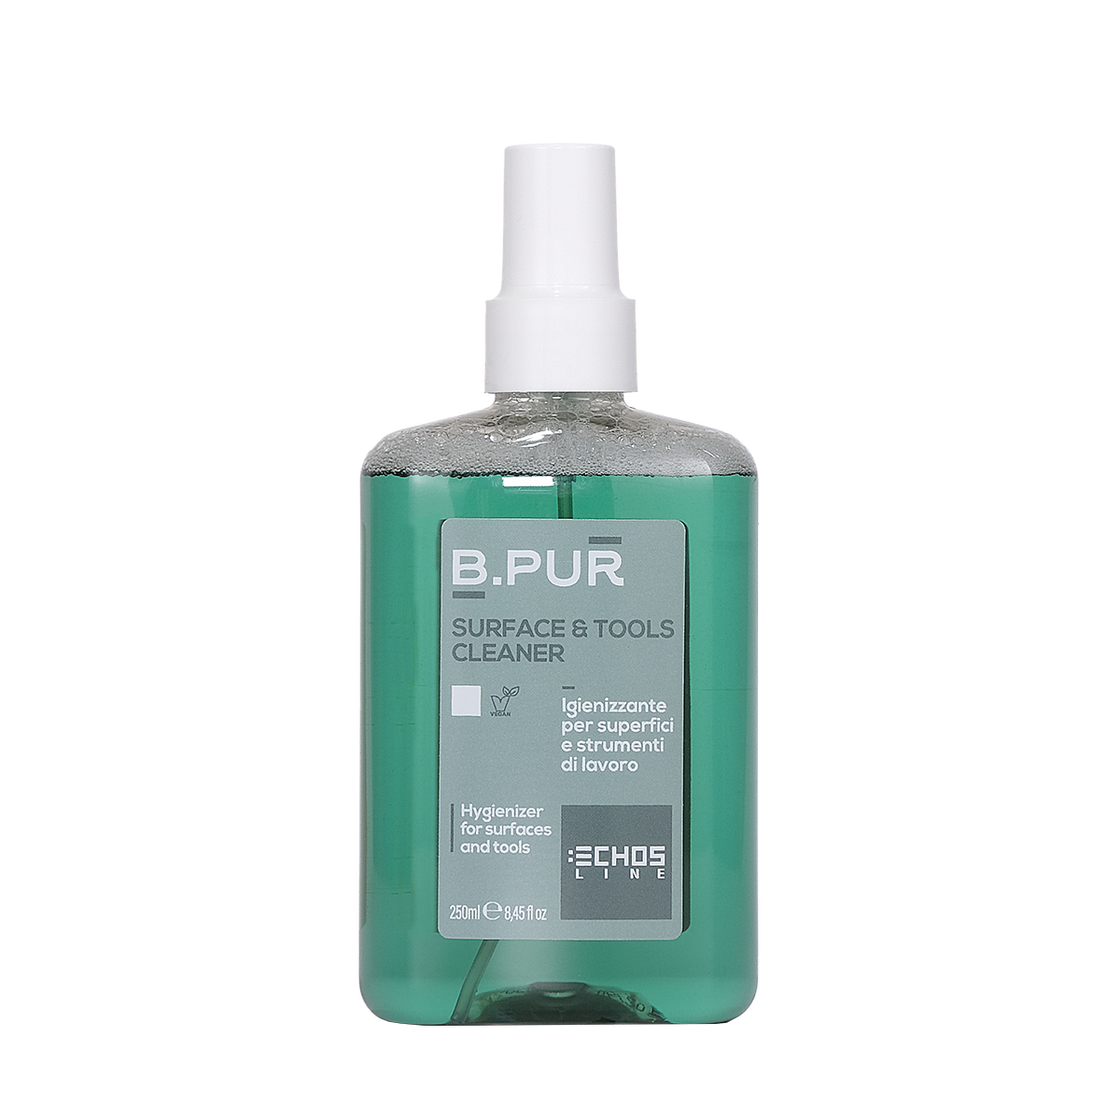 ECHOS B.PUR SURFACE & TOOLS CLEANER 250 ML